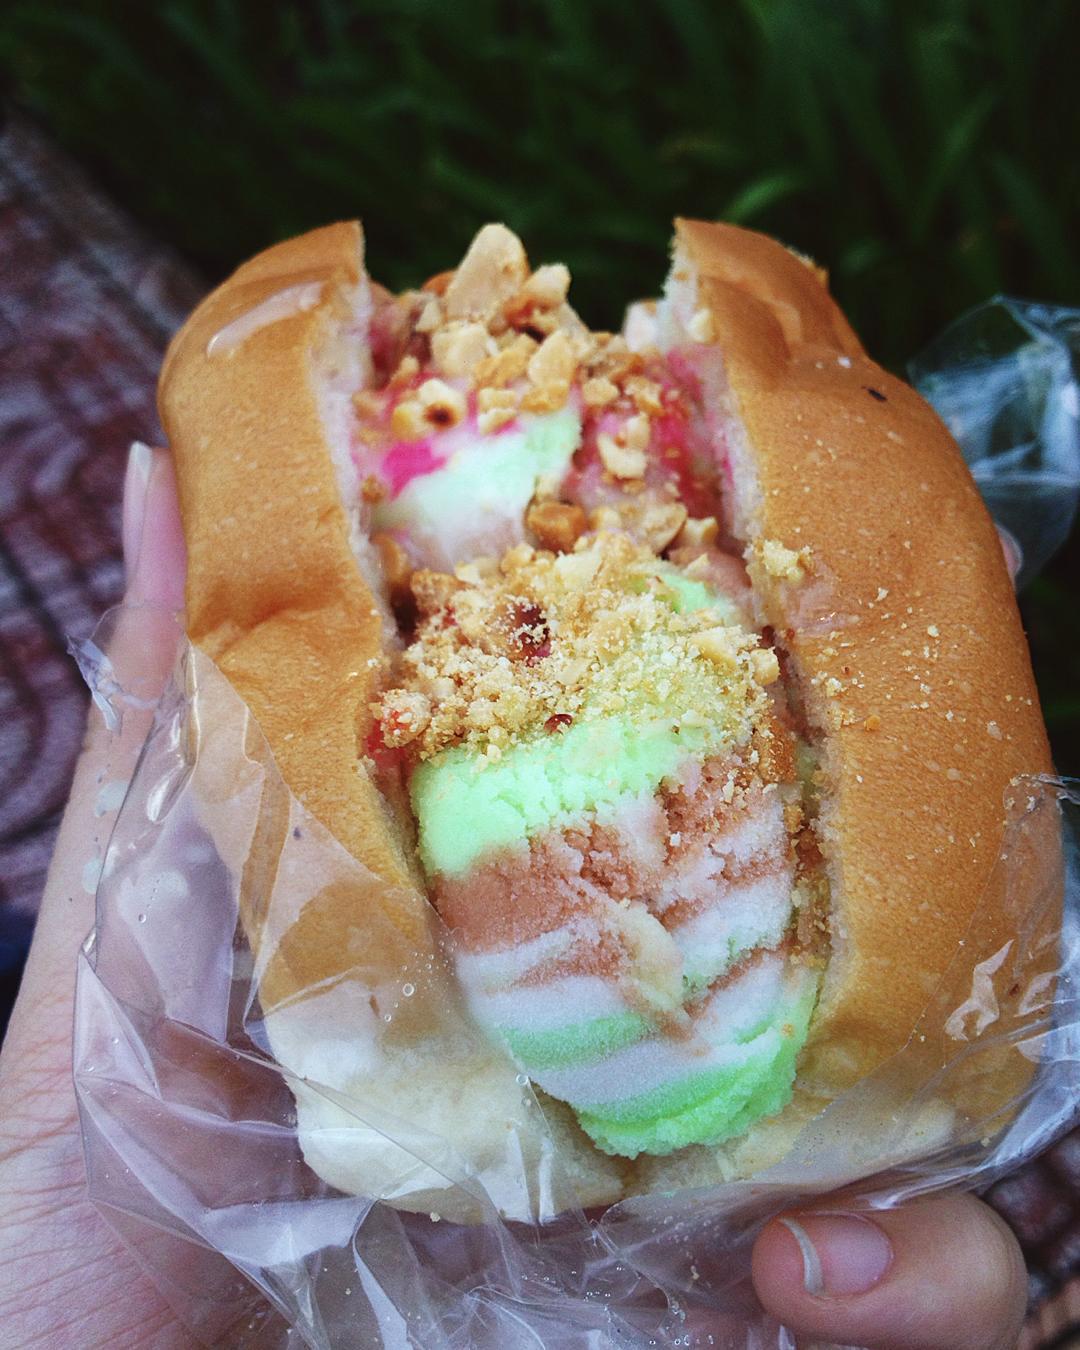 What is the English name for Vietnamese sandwich?
